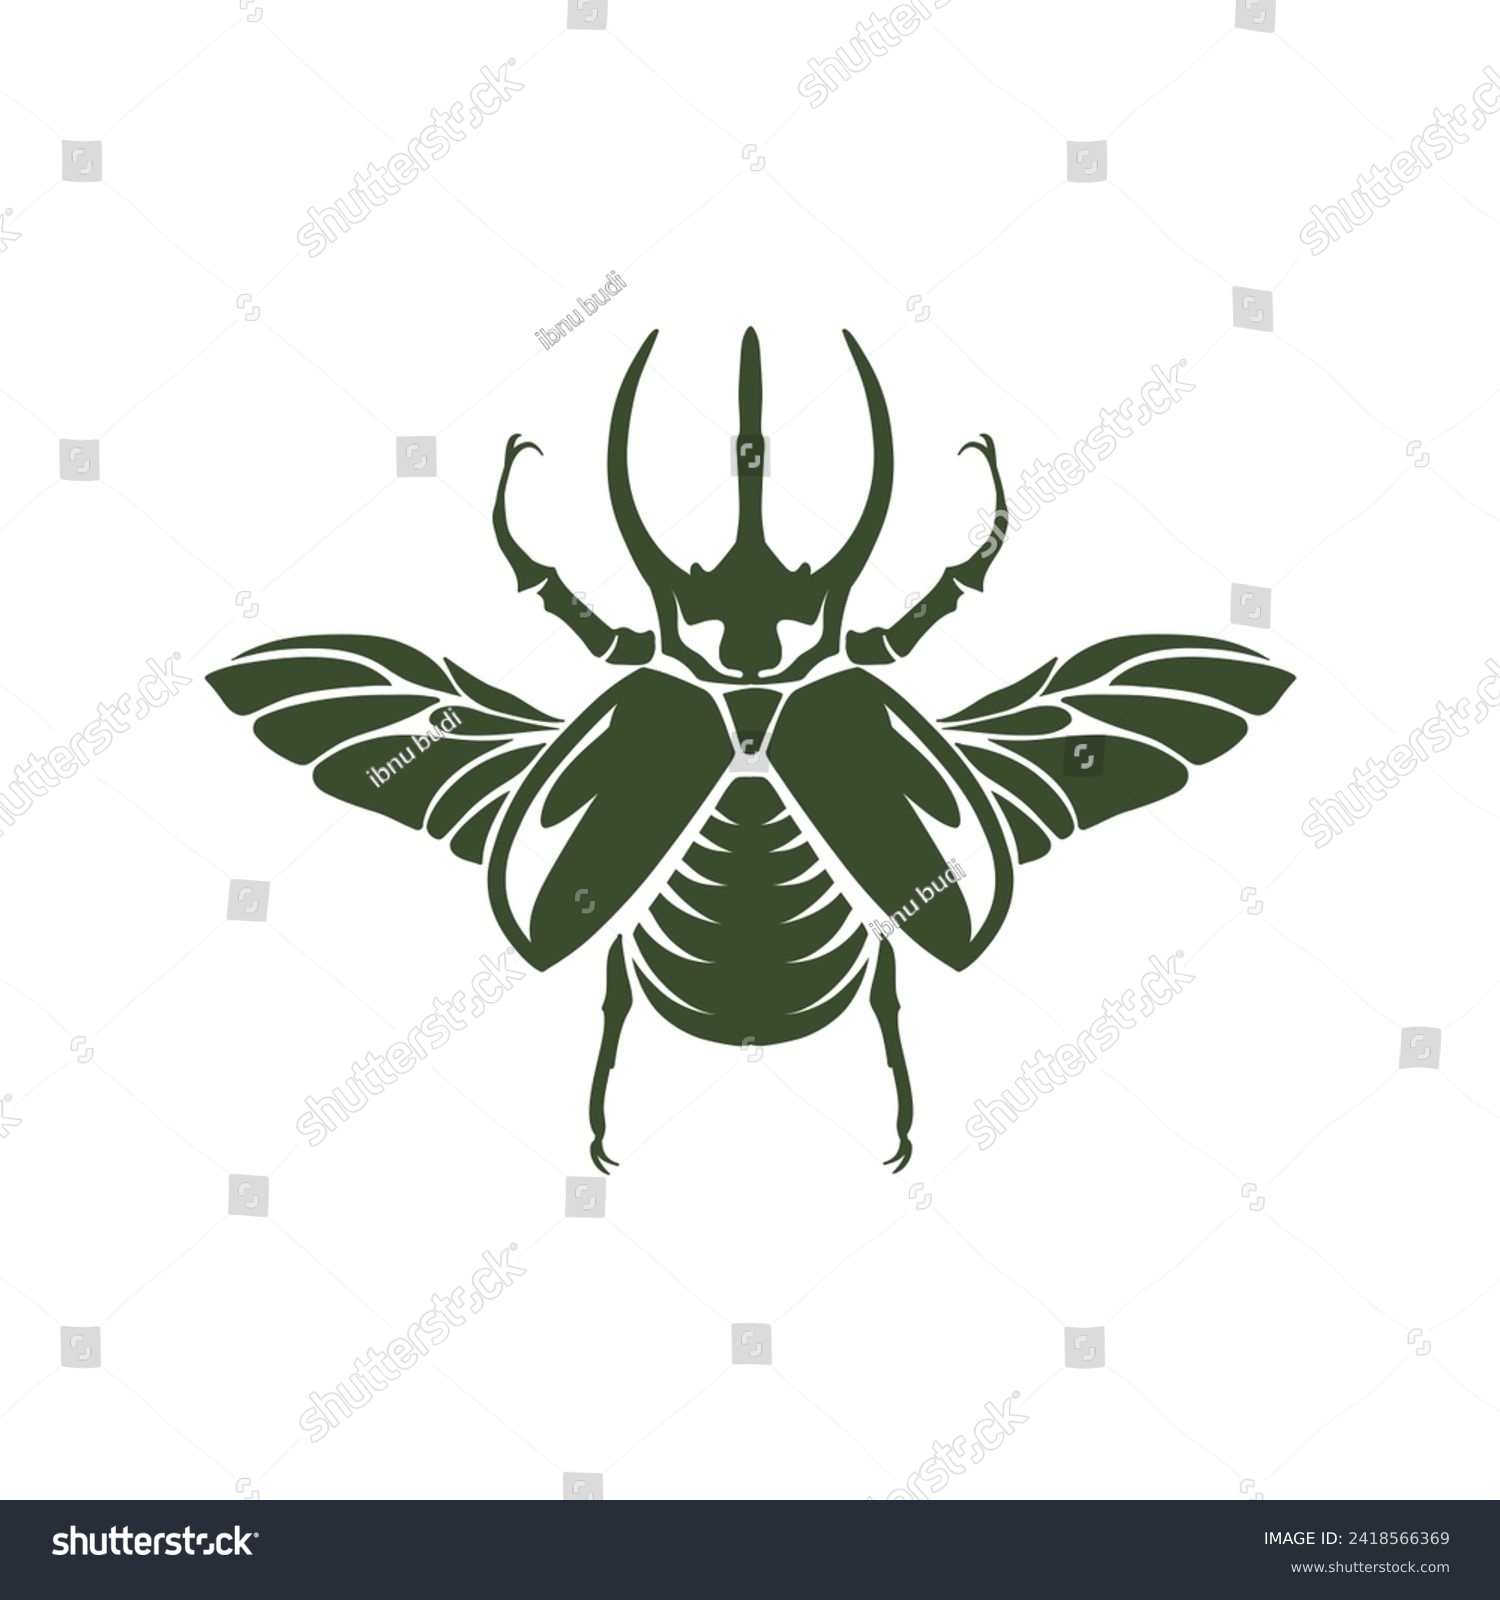 SVG of horned beetle illustration in silhouette style svg